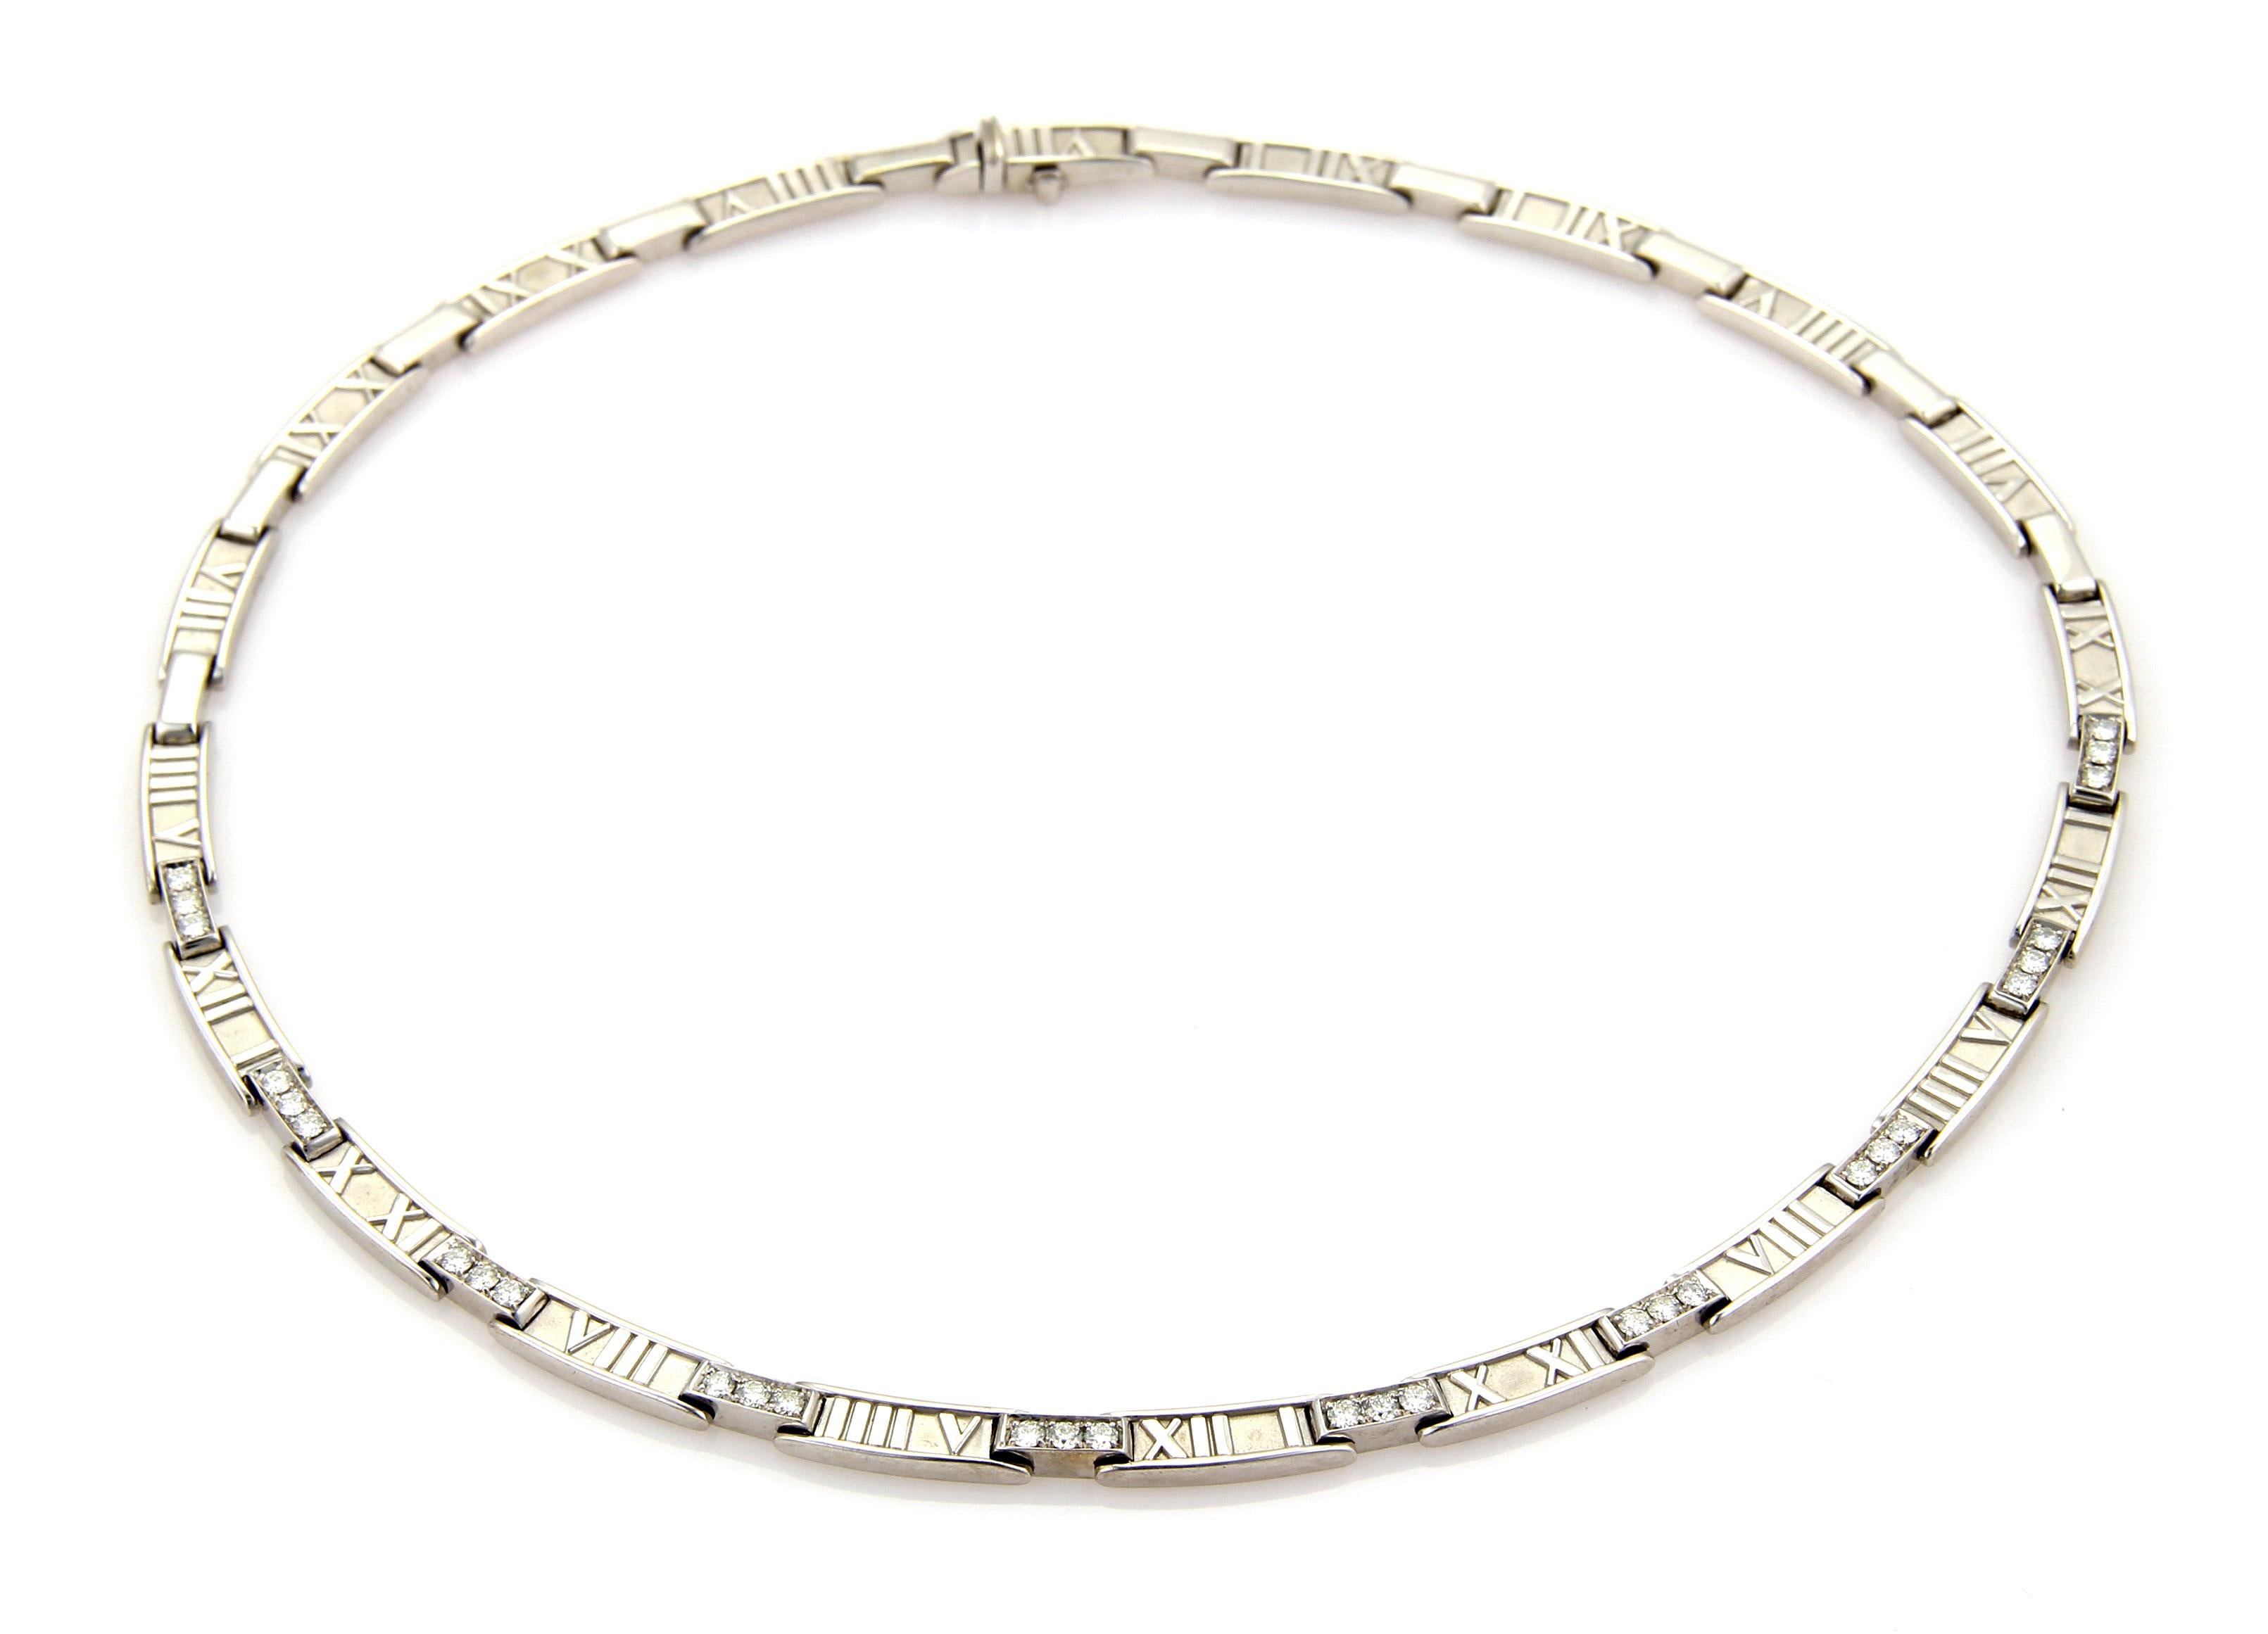 This is a gorgeous diamond necklace by Tiffany & Co. from the ATLAS collection.  It is crafted from solid 18k white gold with a polished and textured finish. The front half of the necklace is adorned with diamonds set in a bar link, the long